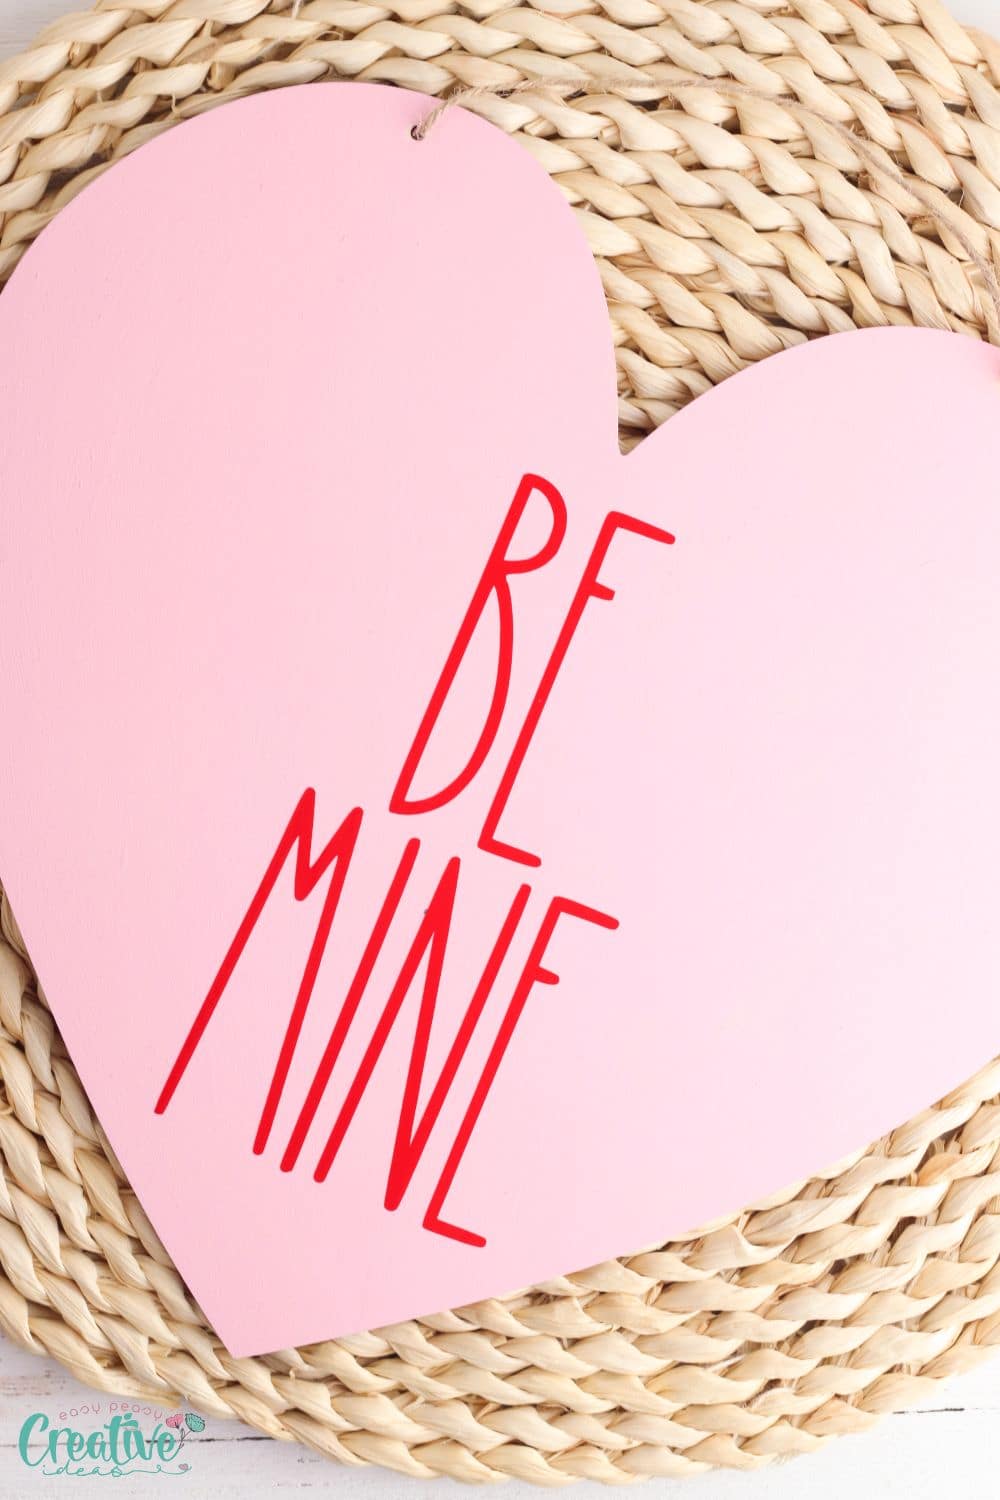 Image of conversation heart decoration for Valentine's day